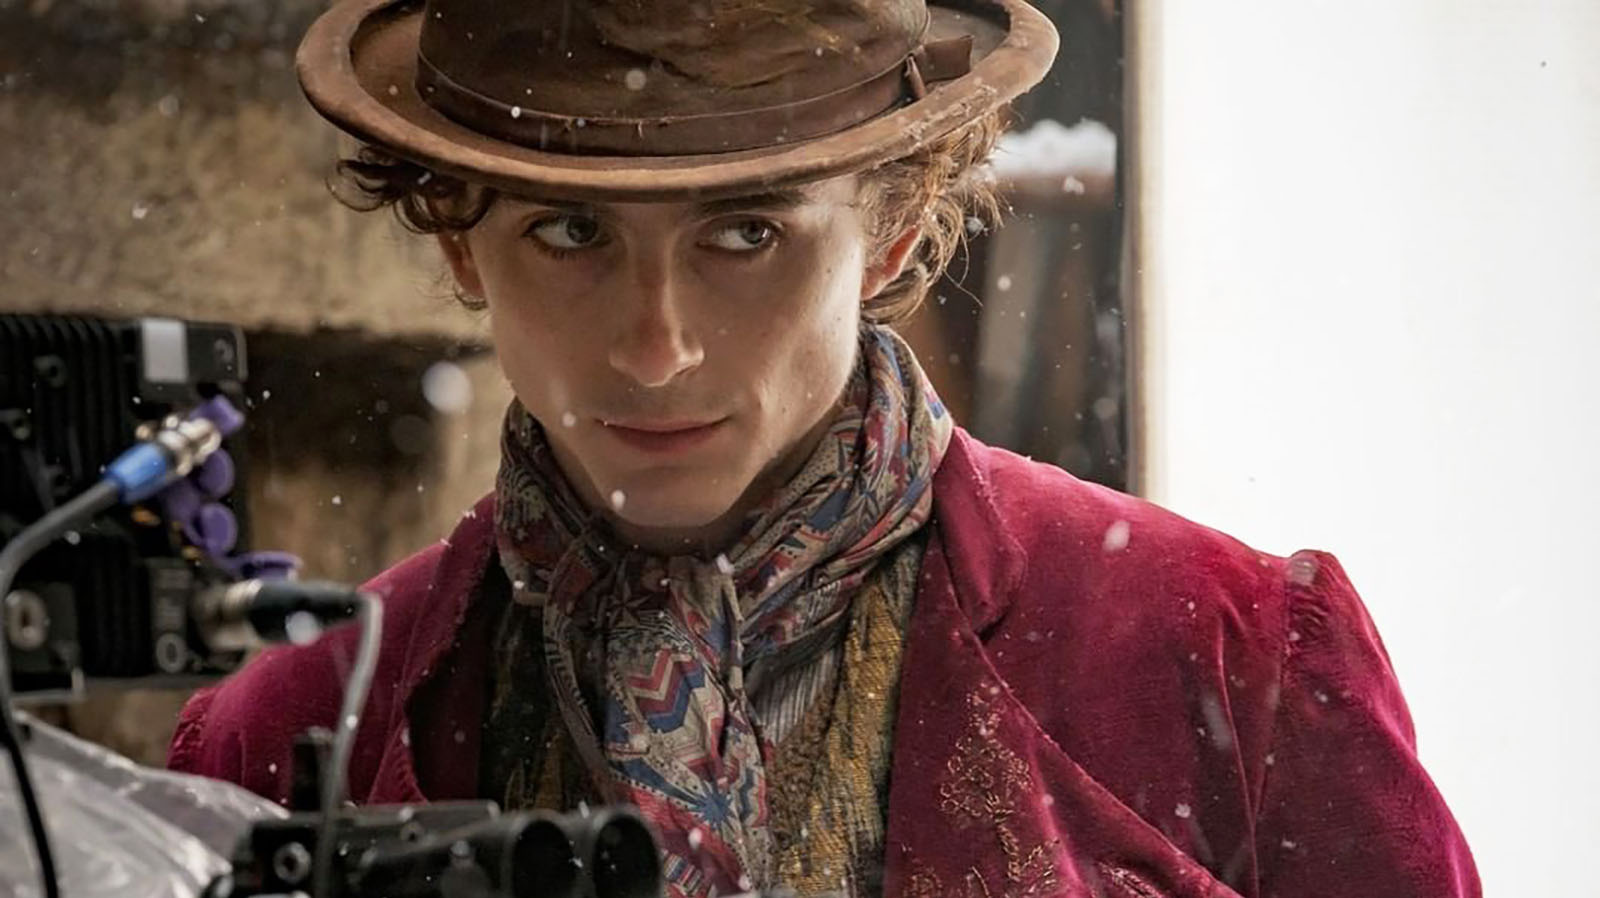 Timothée Chalamet shows us a world of pure imagination in new